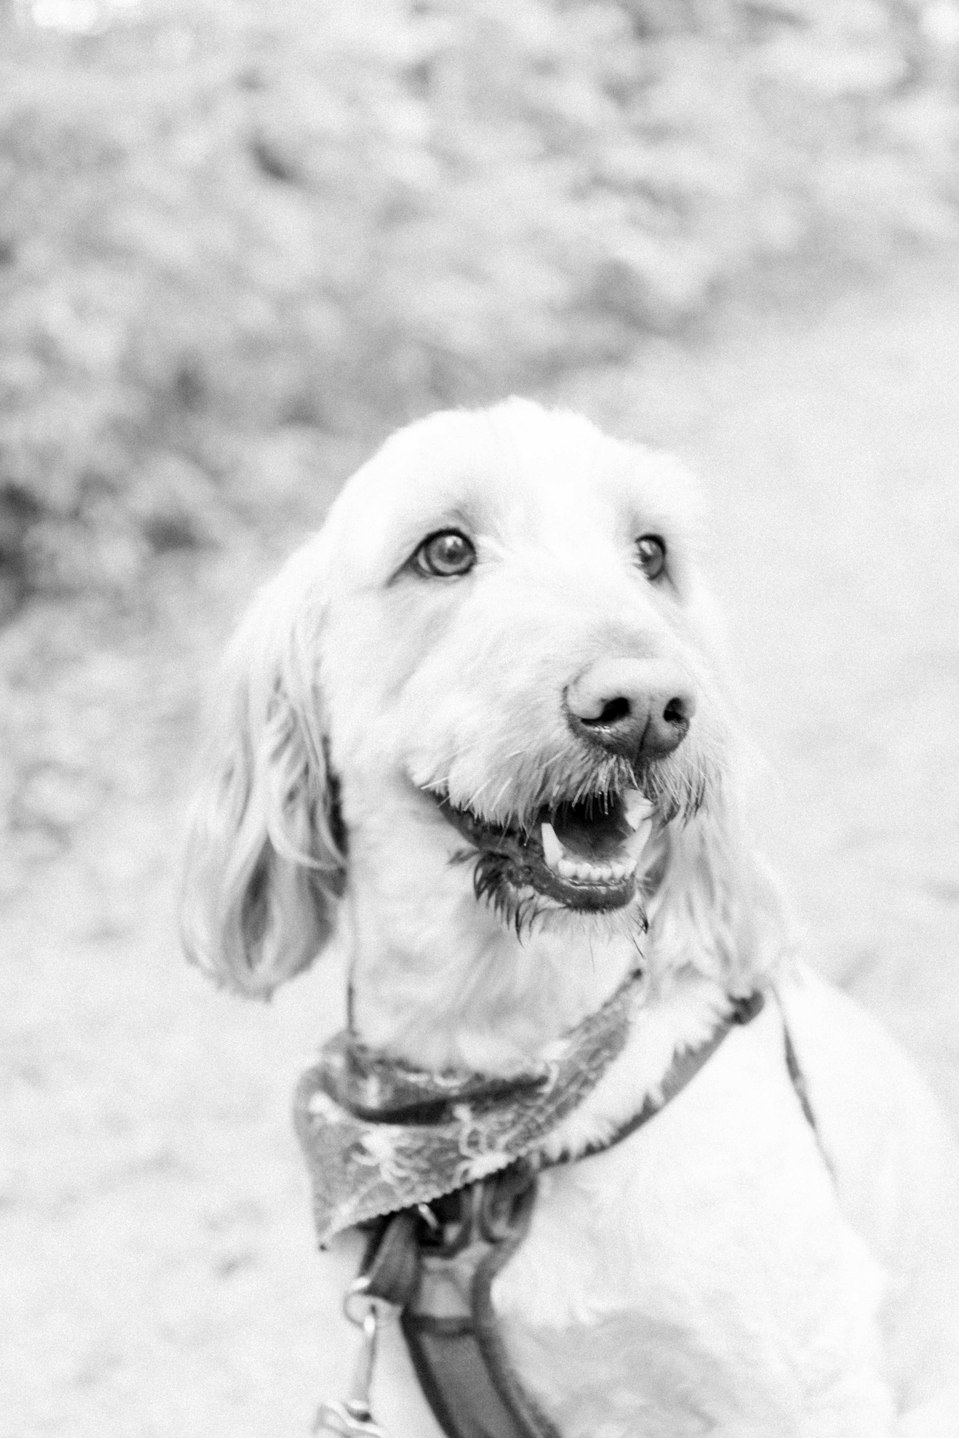 Black and white candid photo of a dog on a trail, Fall photos, Niagara family photographer, family photography, Niagara portrait photographer, portrait photography, Emily VanderBeek Photography.